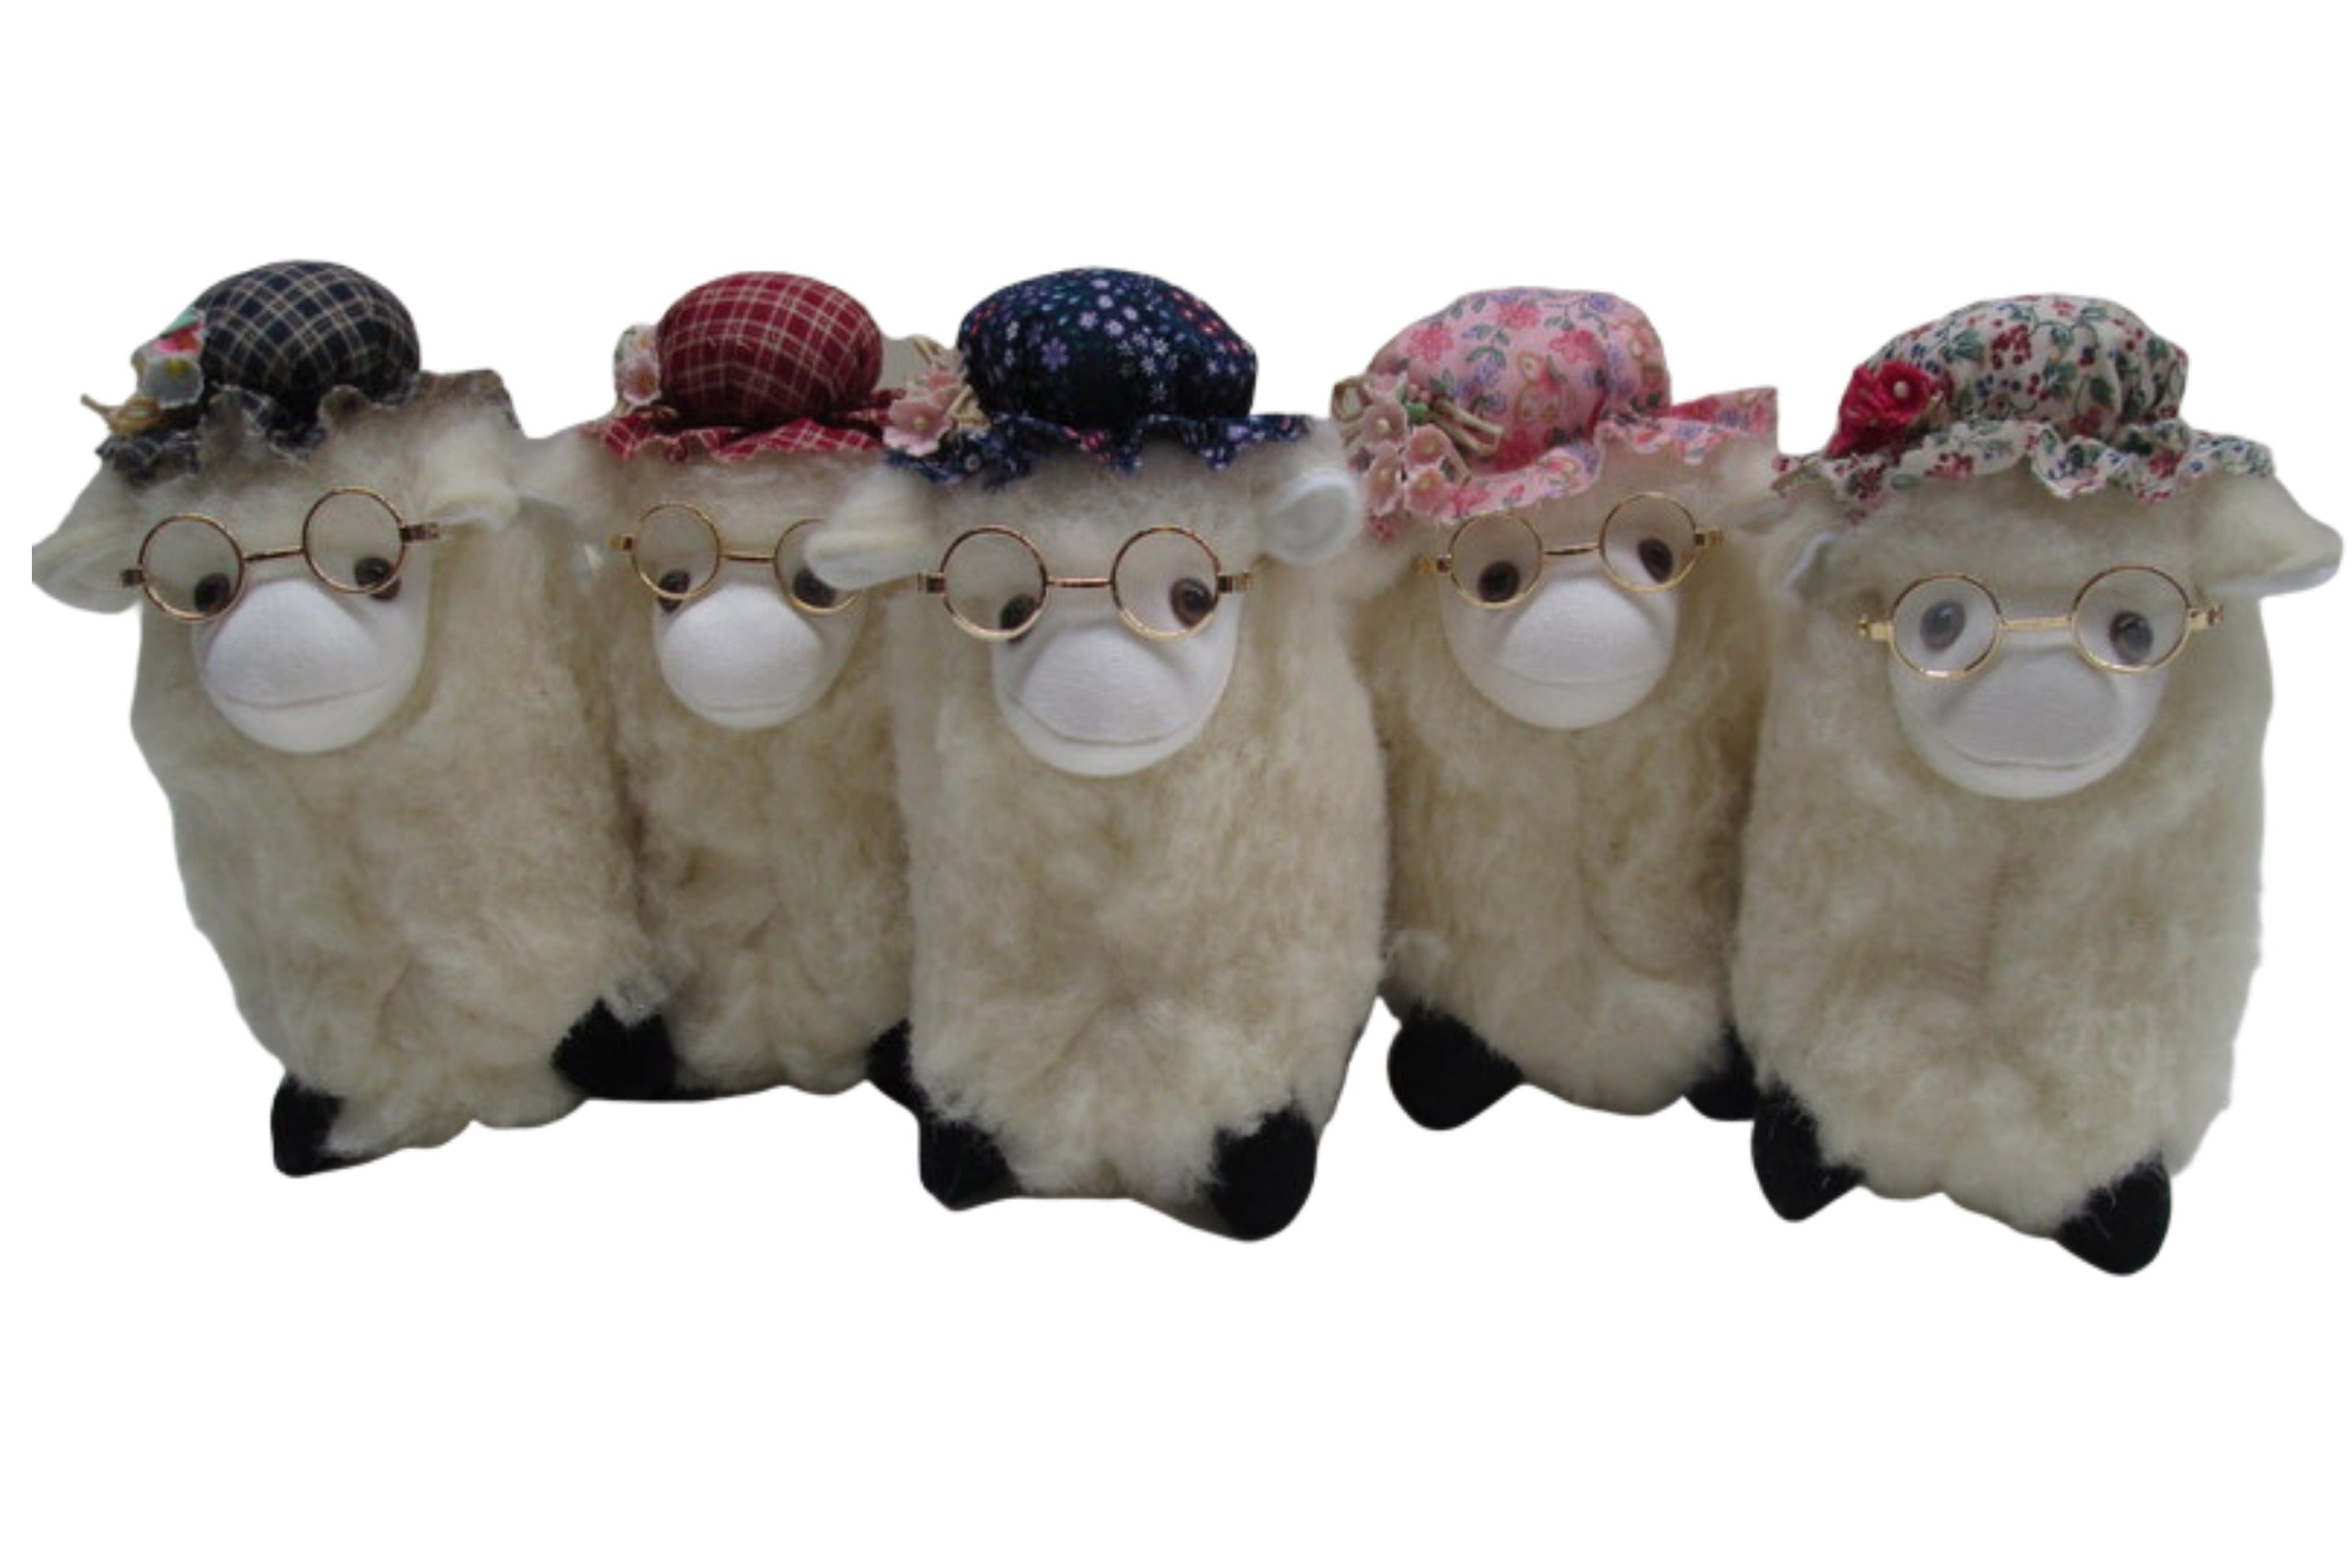 Romney Sheep with Hat & Glasses